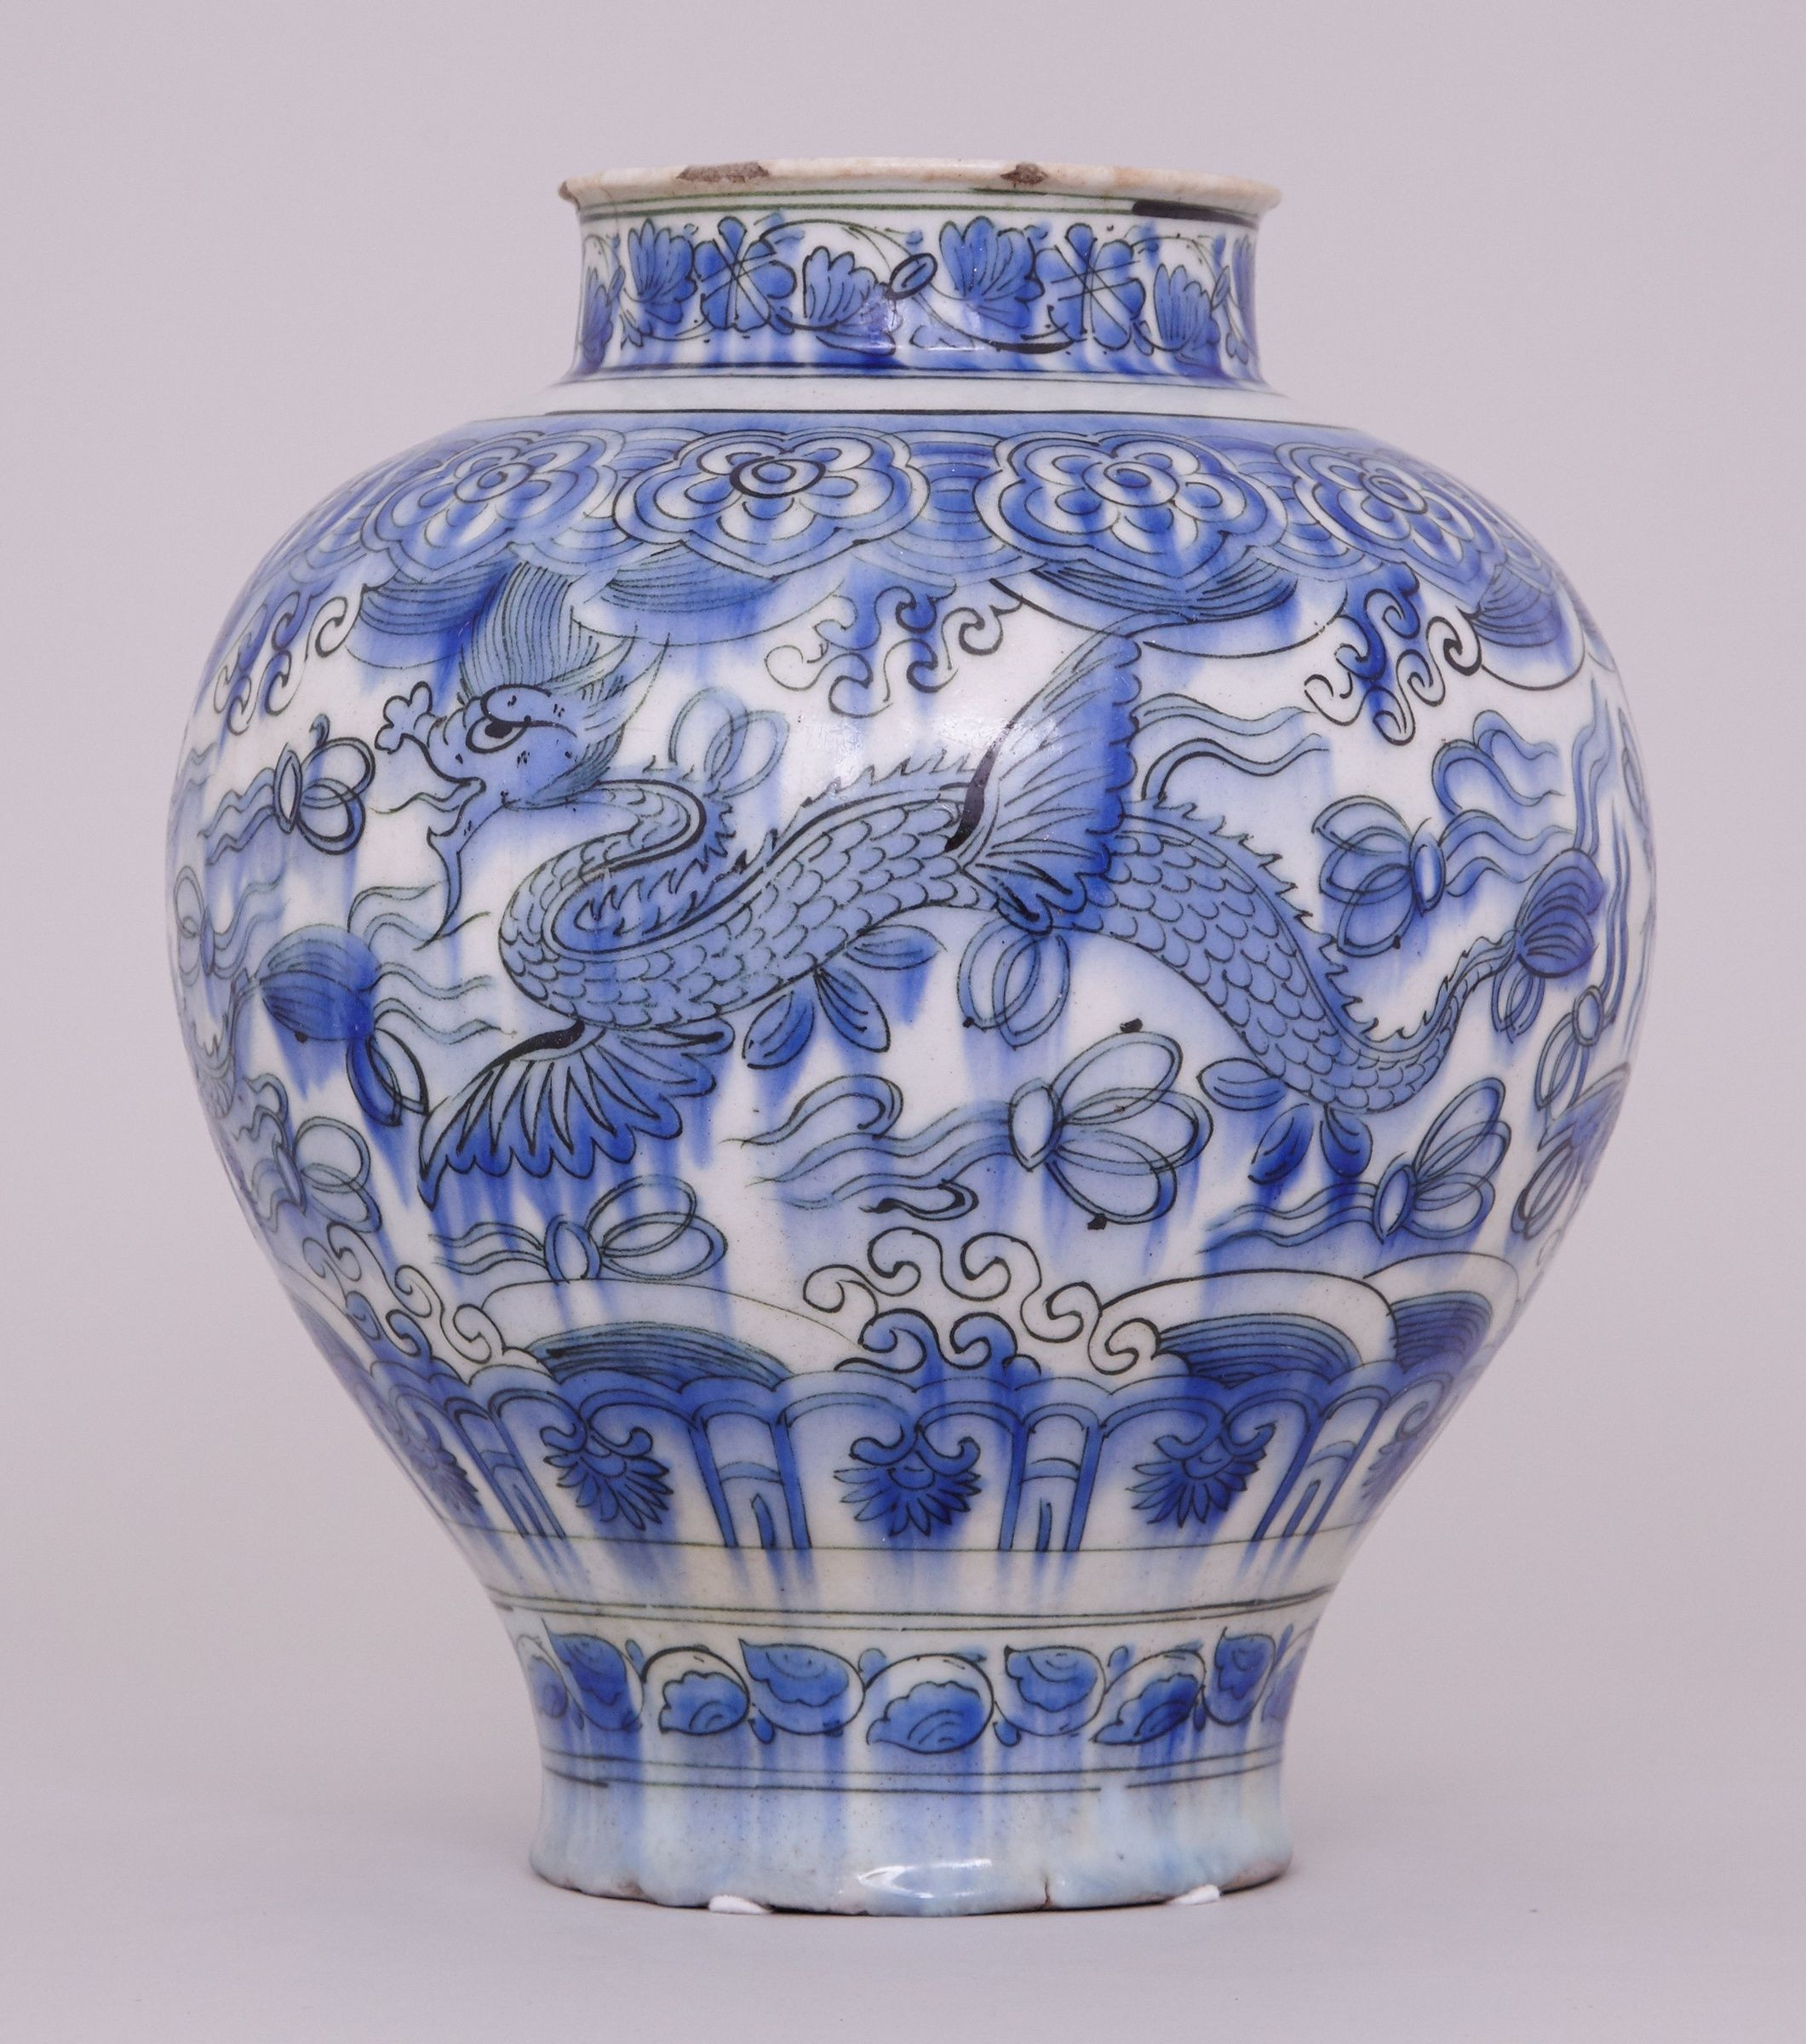 23 Fabulous Chinese Porcelain Vase 2022 free download chinese porcelain vase of white pottery vase elegant a blue and white persian safavid jar 17th regarding white pottery vase elegant a blue and white persian safavid jar 17th century